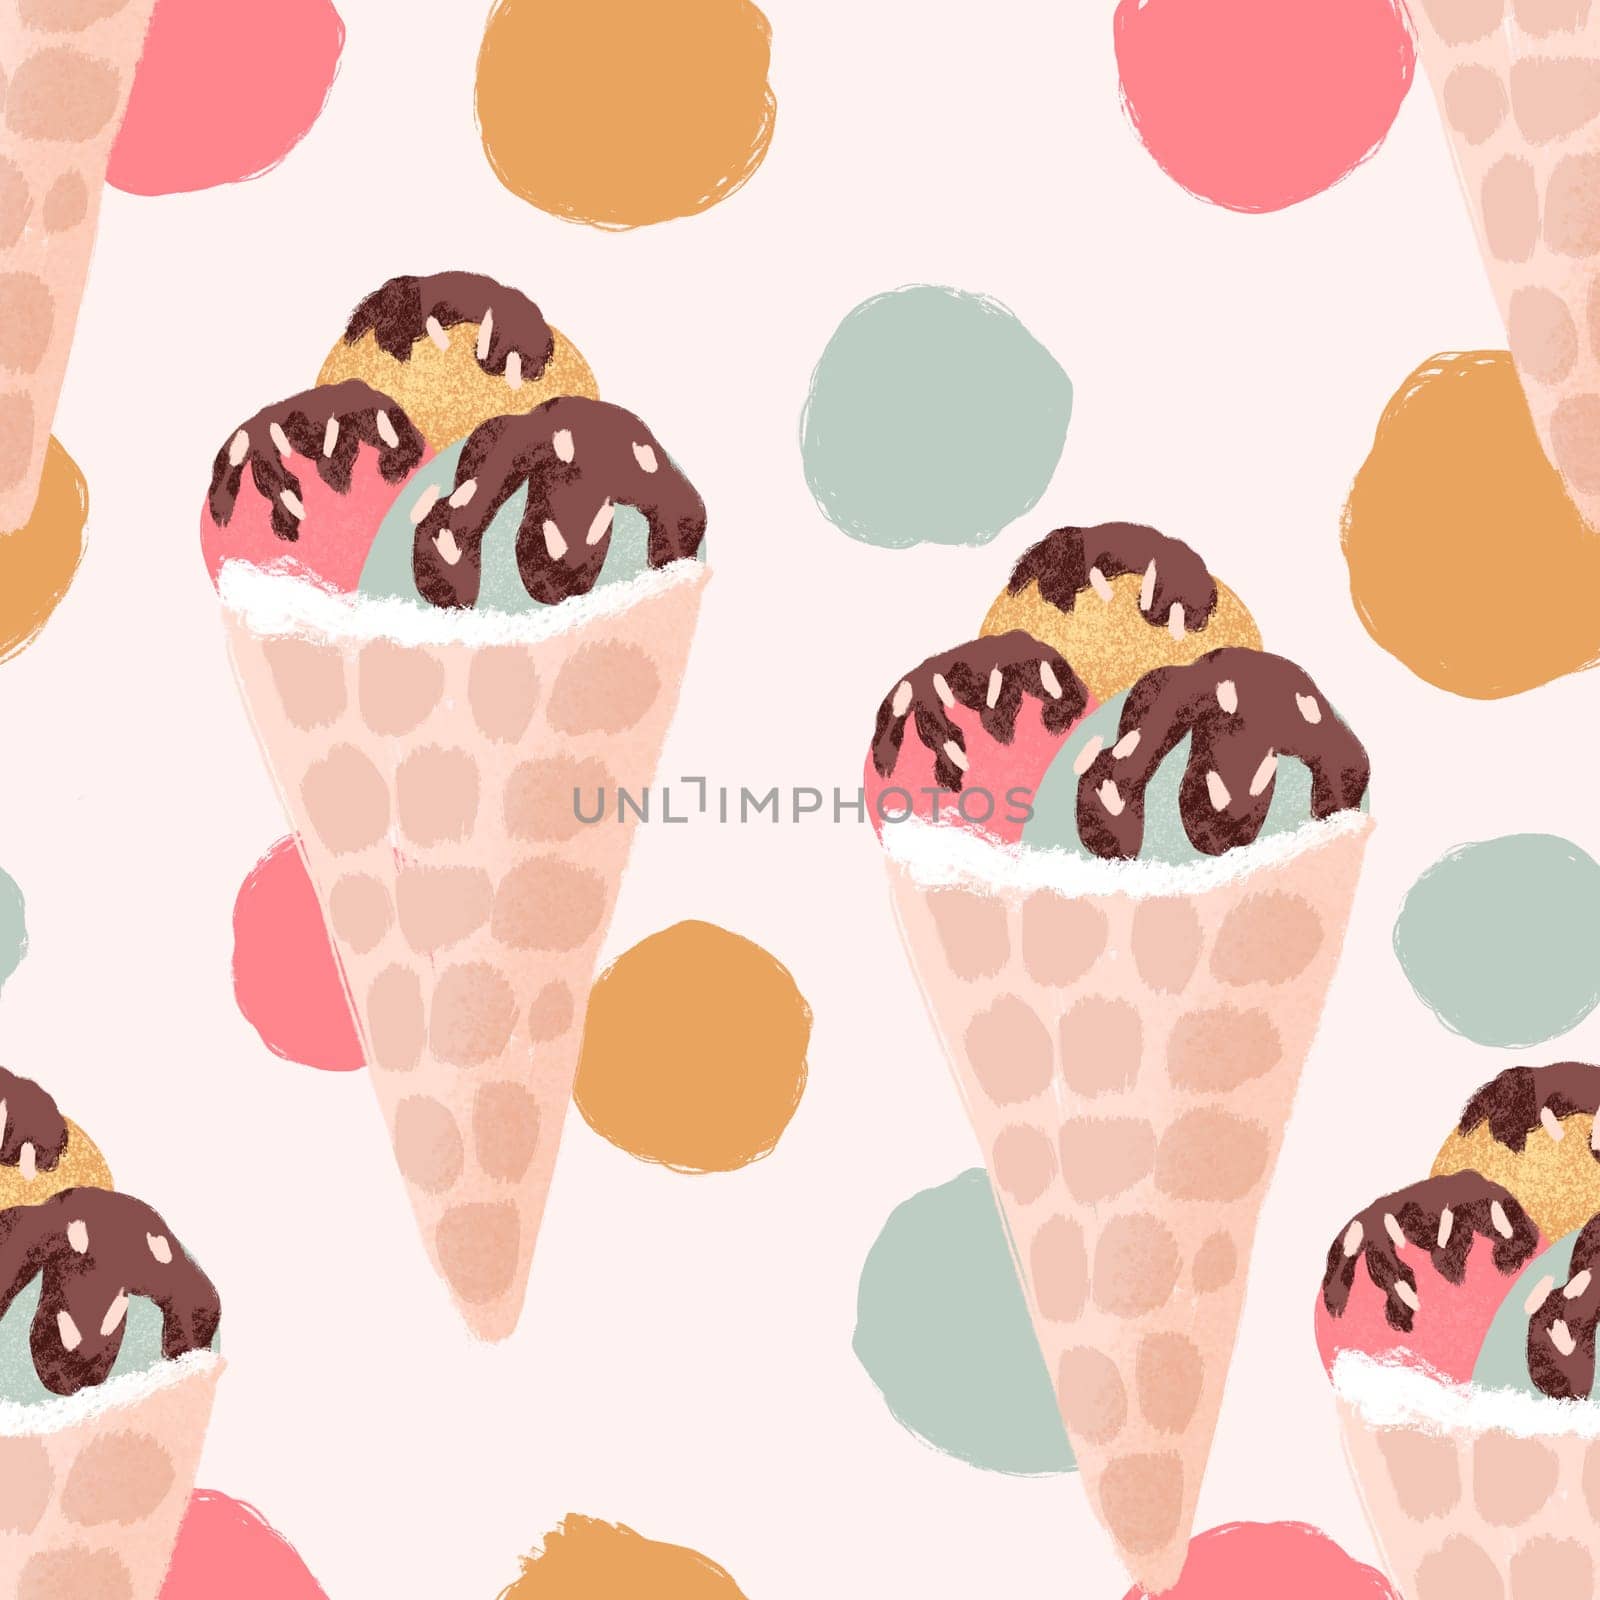 Hand drawn seamless pattern of ice cream in cup bowl, retro vintage style. Pink mint yellow round shape with chocolate, sweet tasty summer holiday food, fun design for colorful beach art. by Lagmar